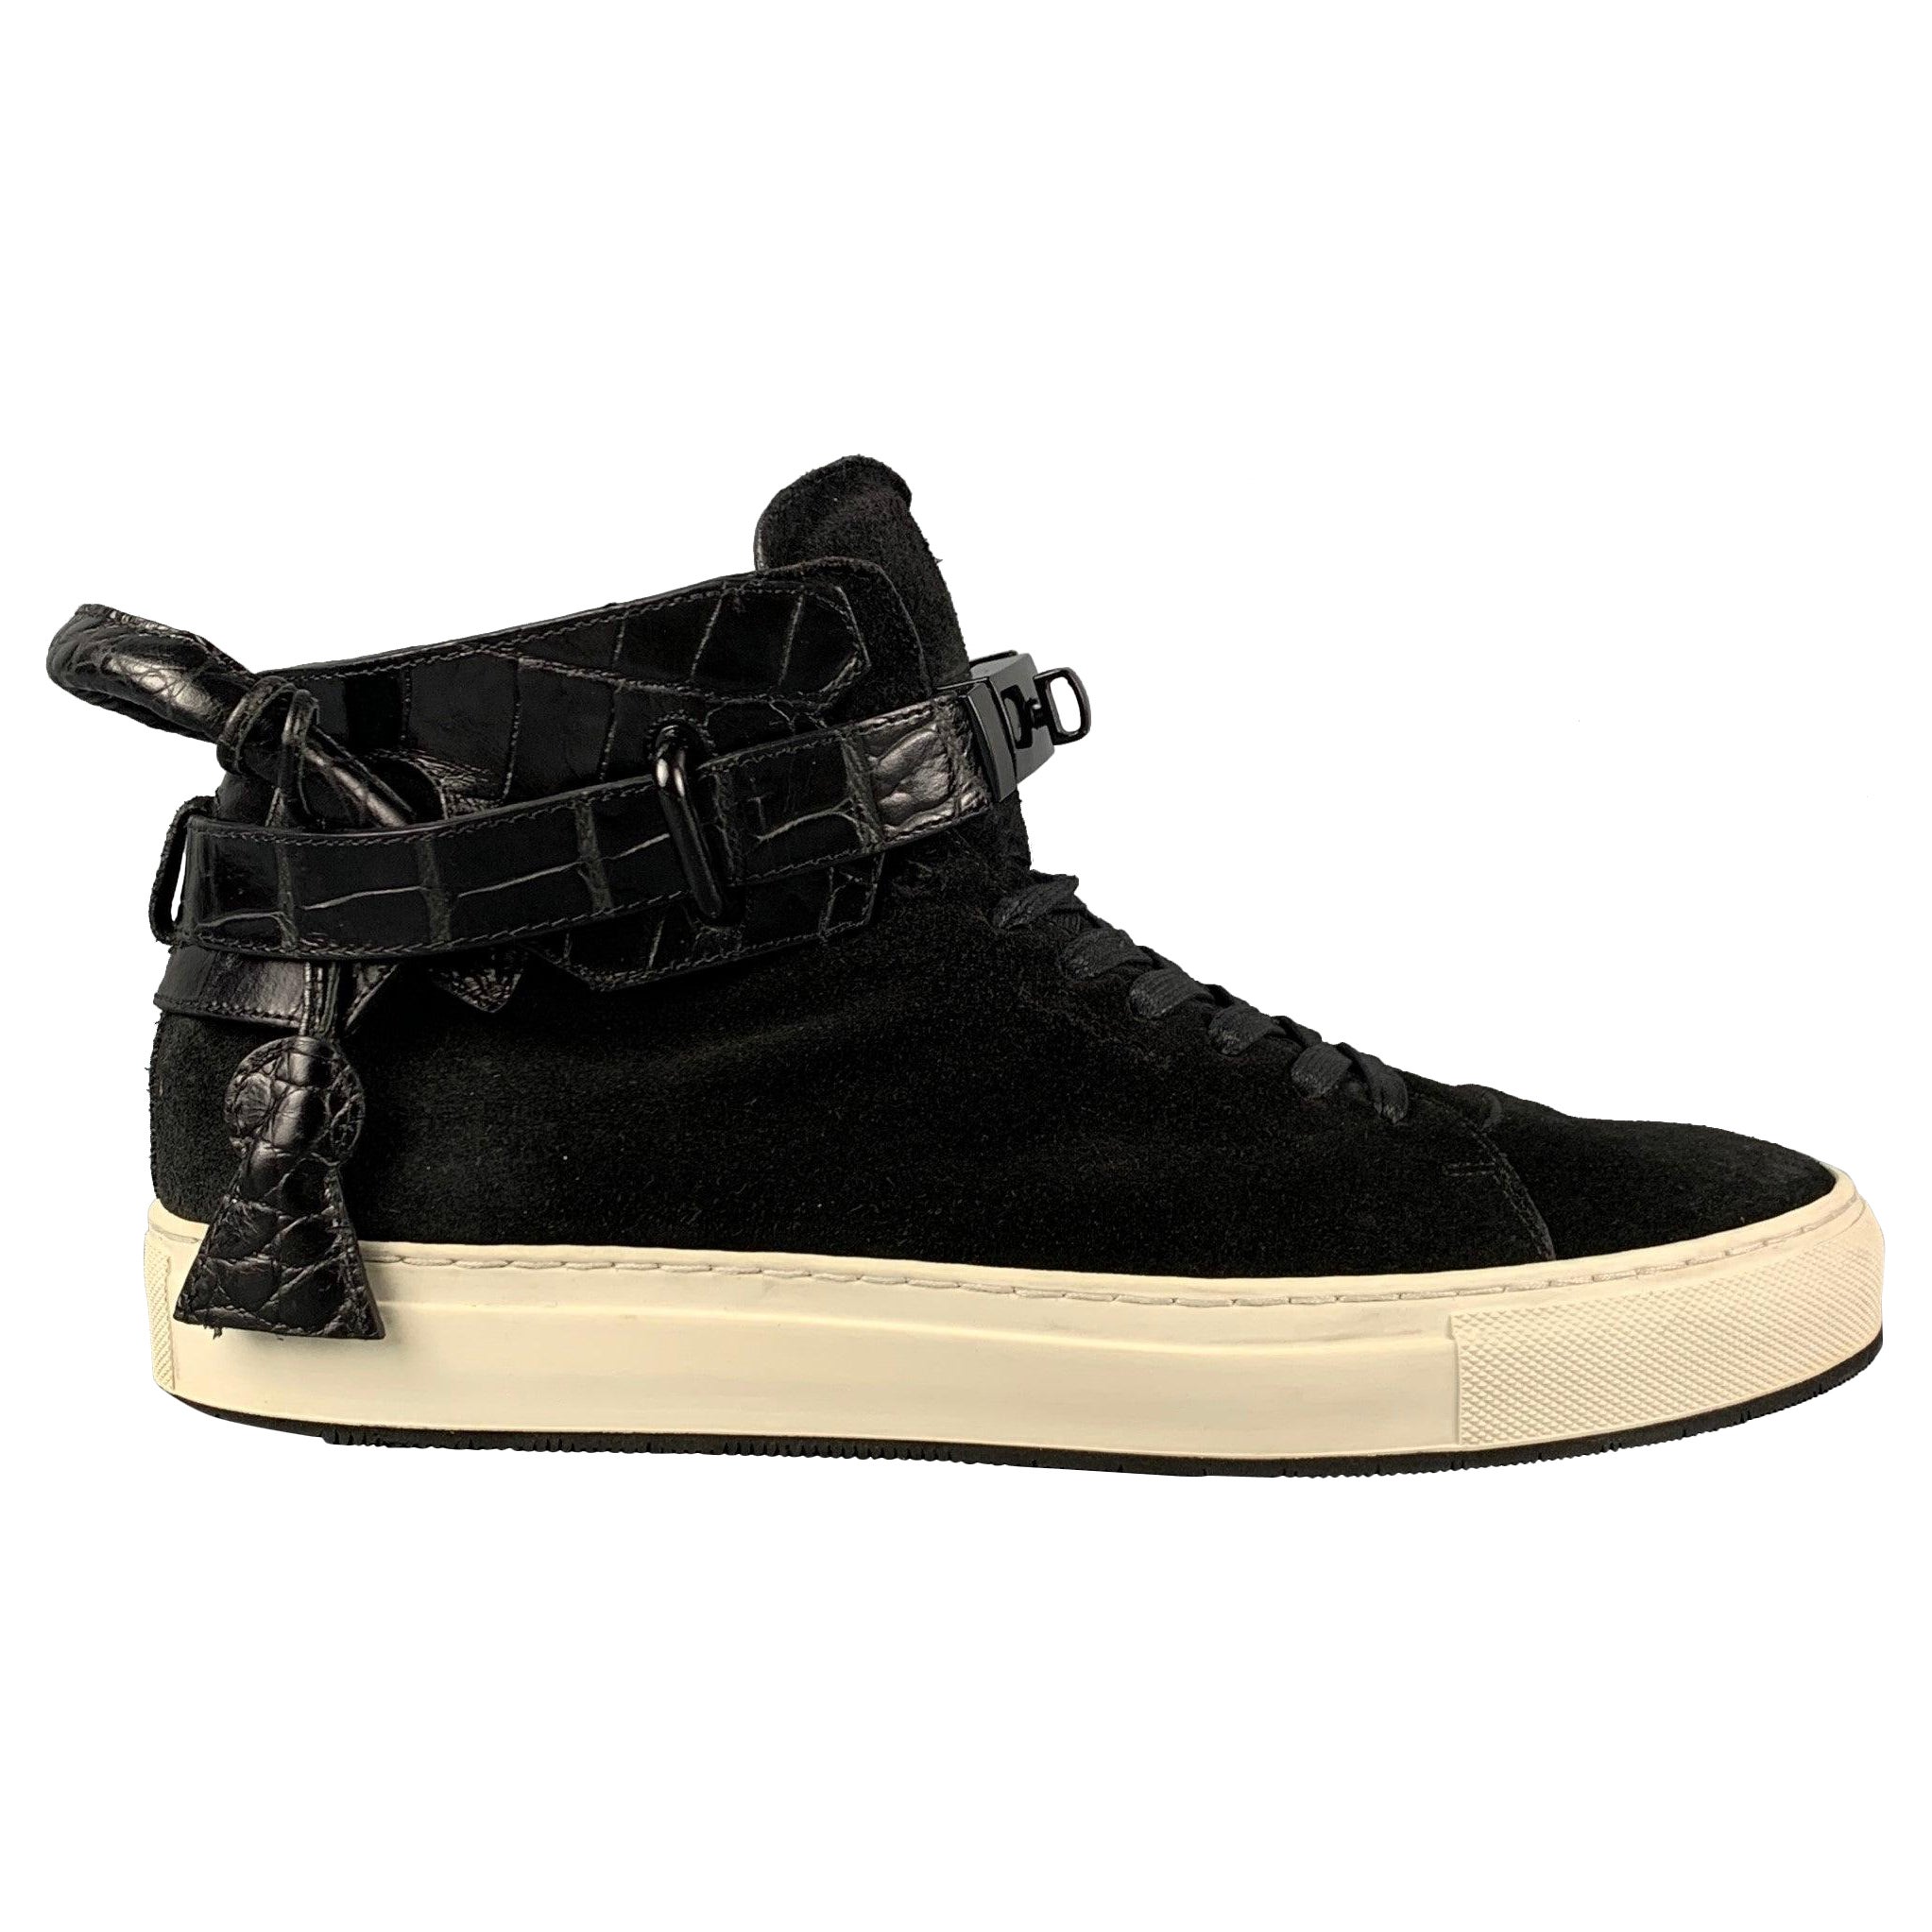 BUSCEMI Size 11 Black Embossed Suede 100MM High Top Sneakers For Sale